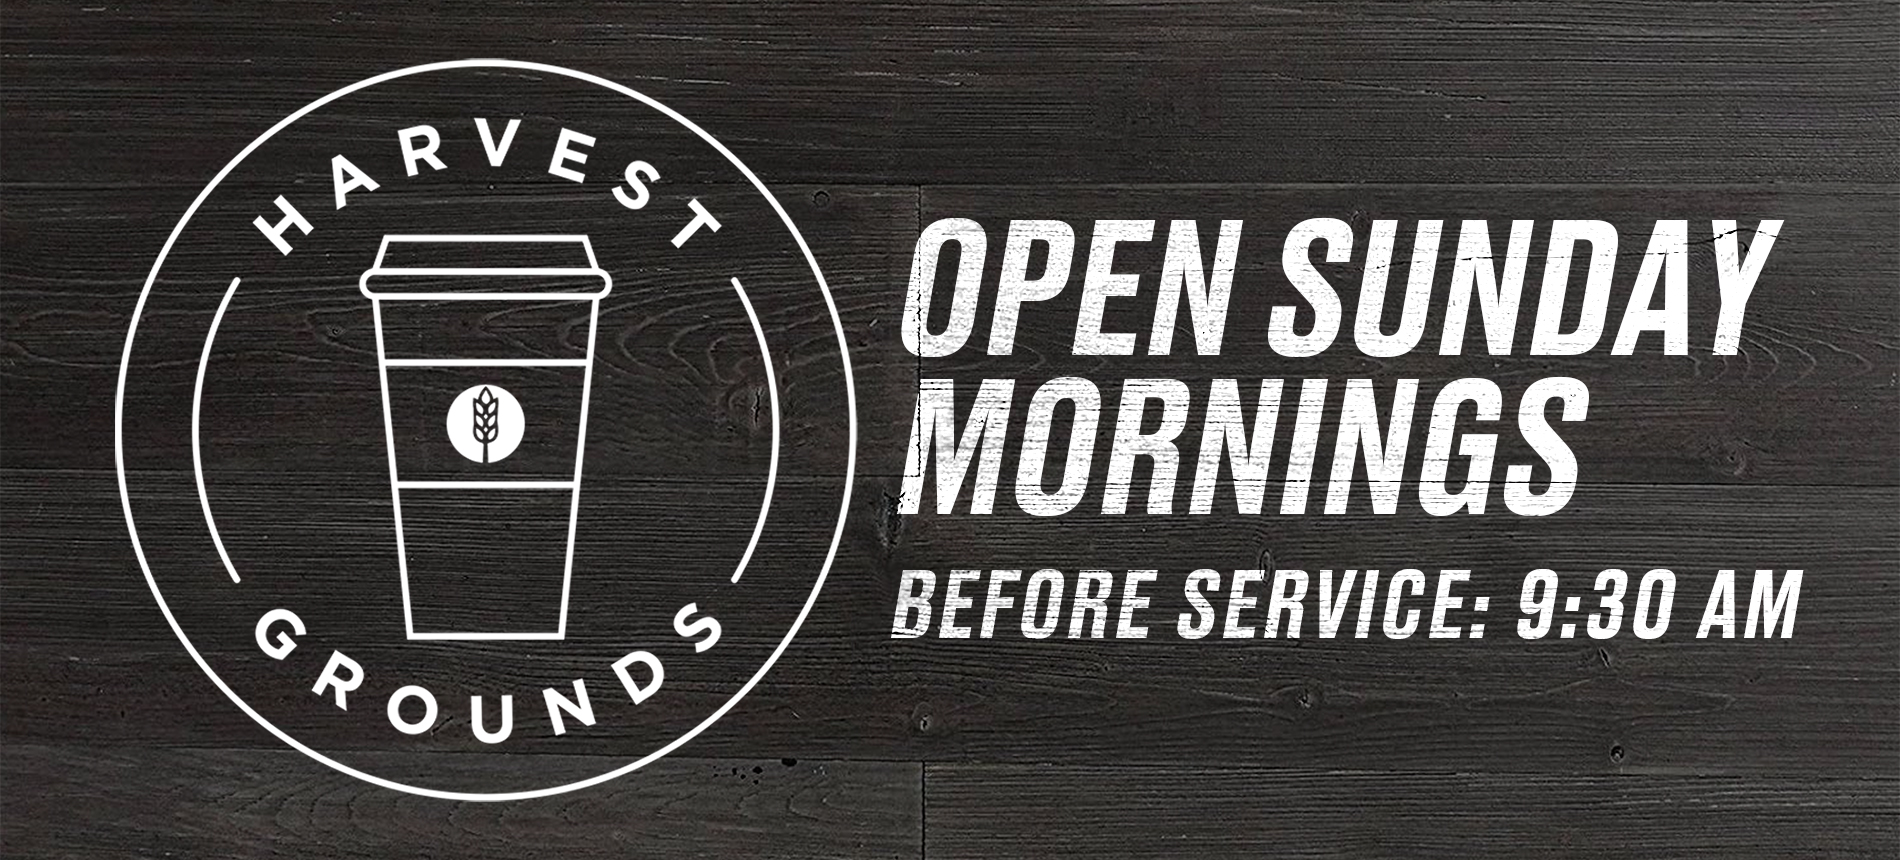 Open Sunday Mornings Before Service 9:15AM and Again After Service Menu and More Info